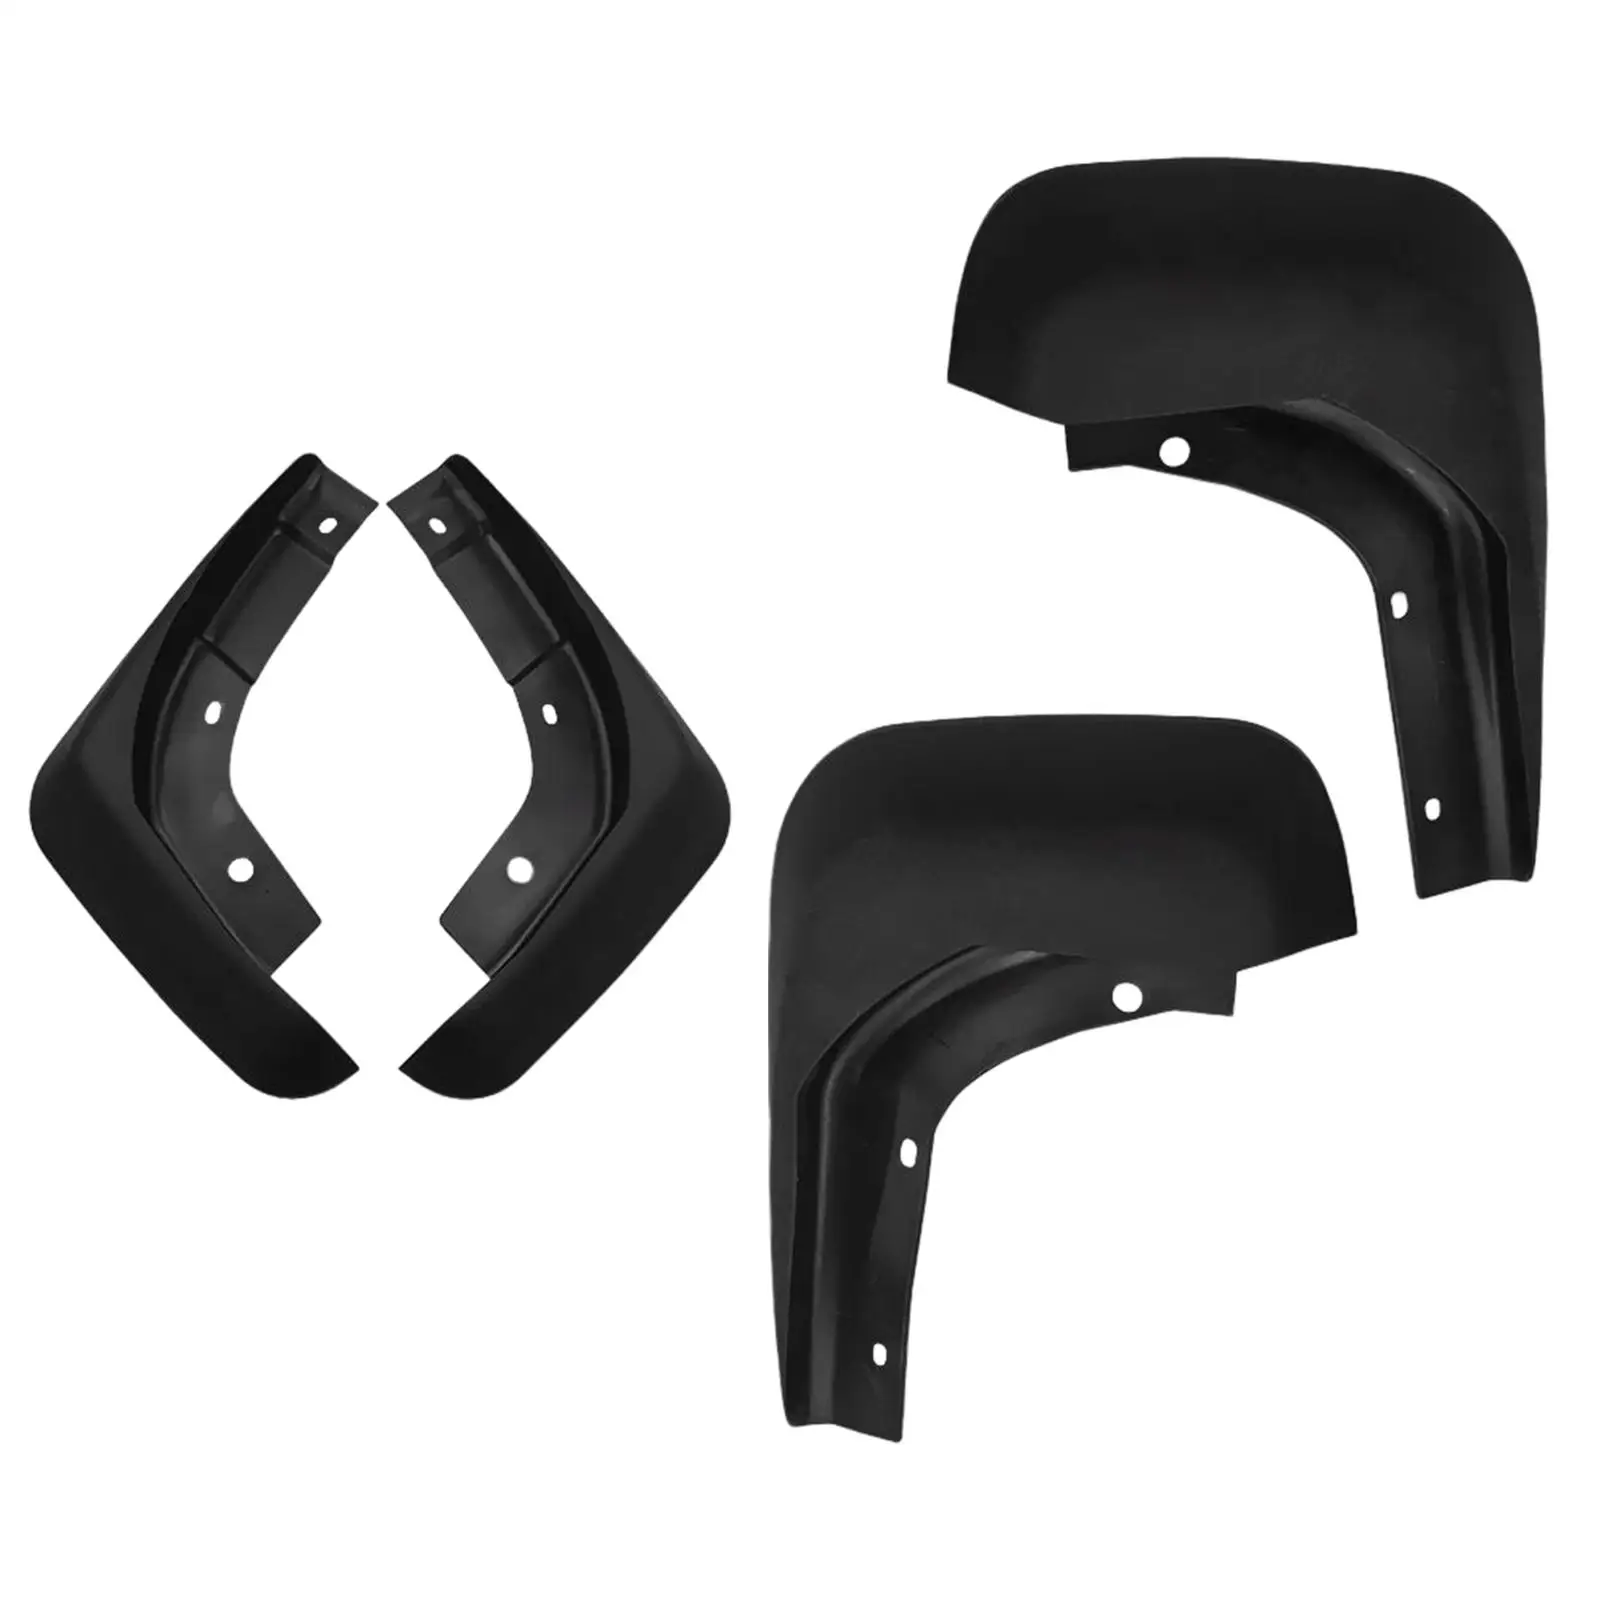 Set of 4 Front Rear Mudguard Kit Flap Mudflap Fit for V60 Replace Spare Parts Easy to Install